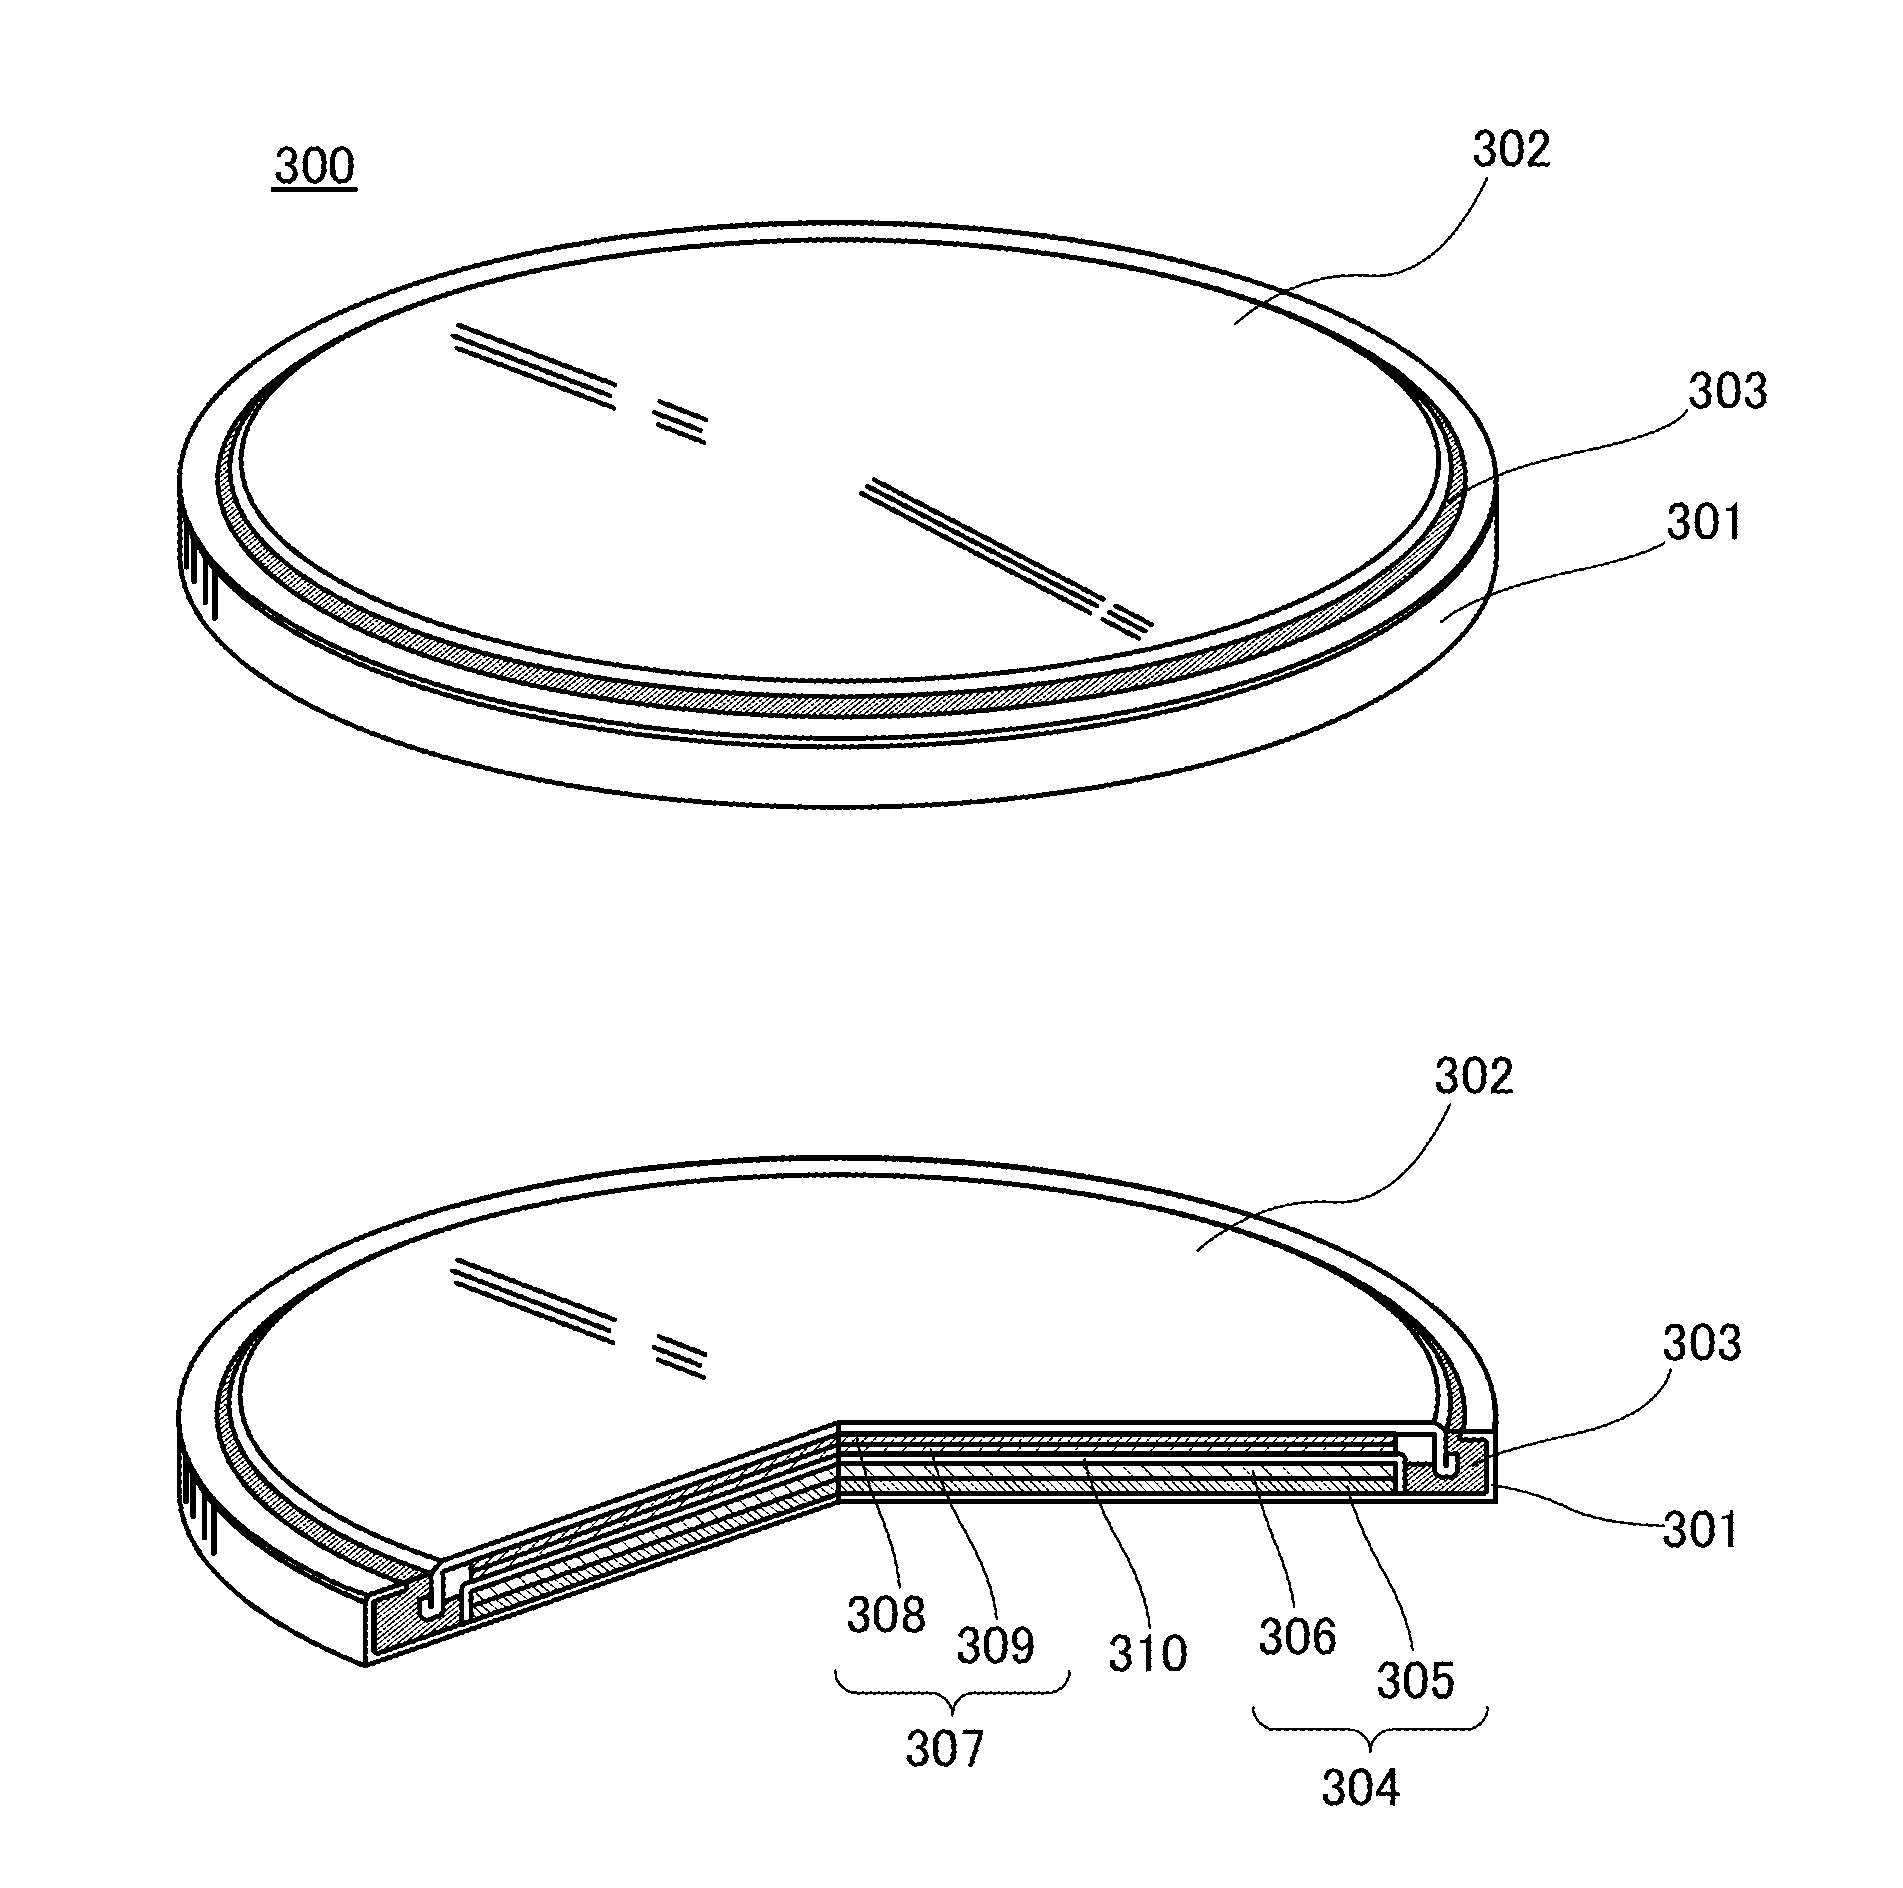 Compound, nonaqueous electrolyte, and power storage device